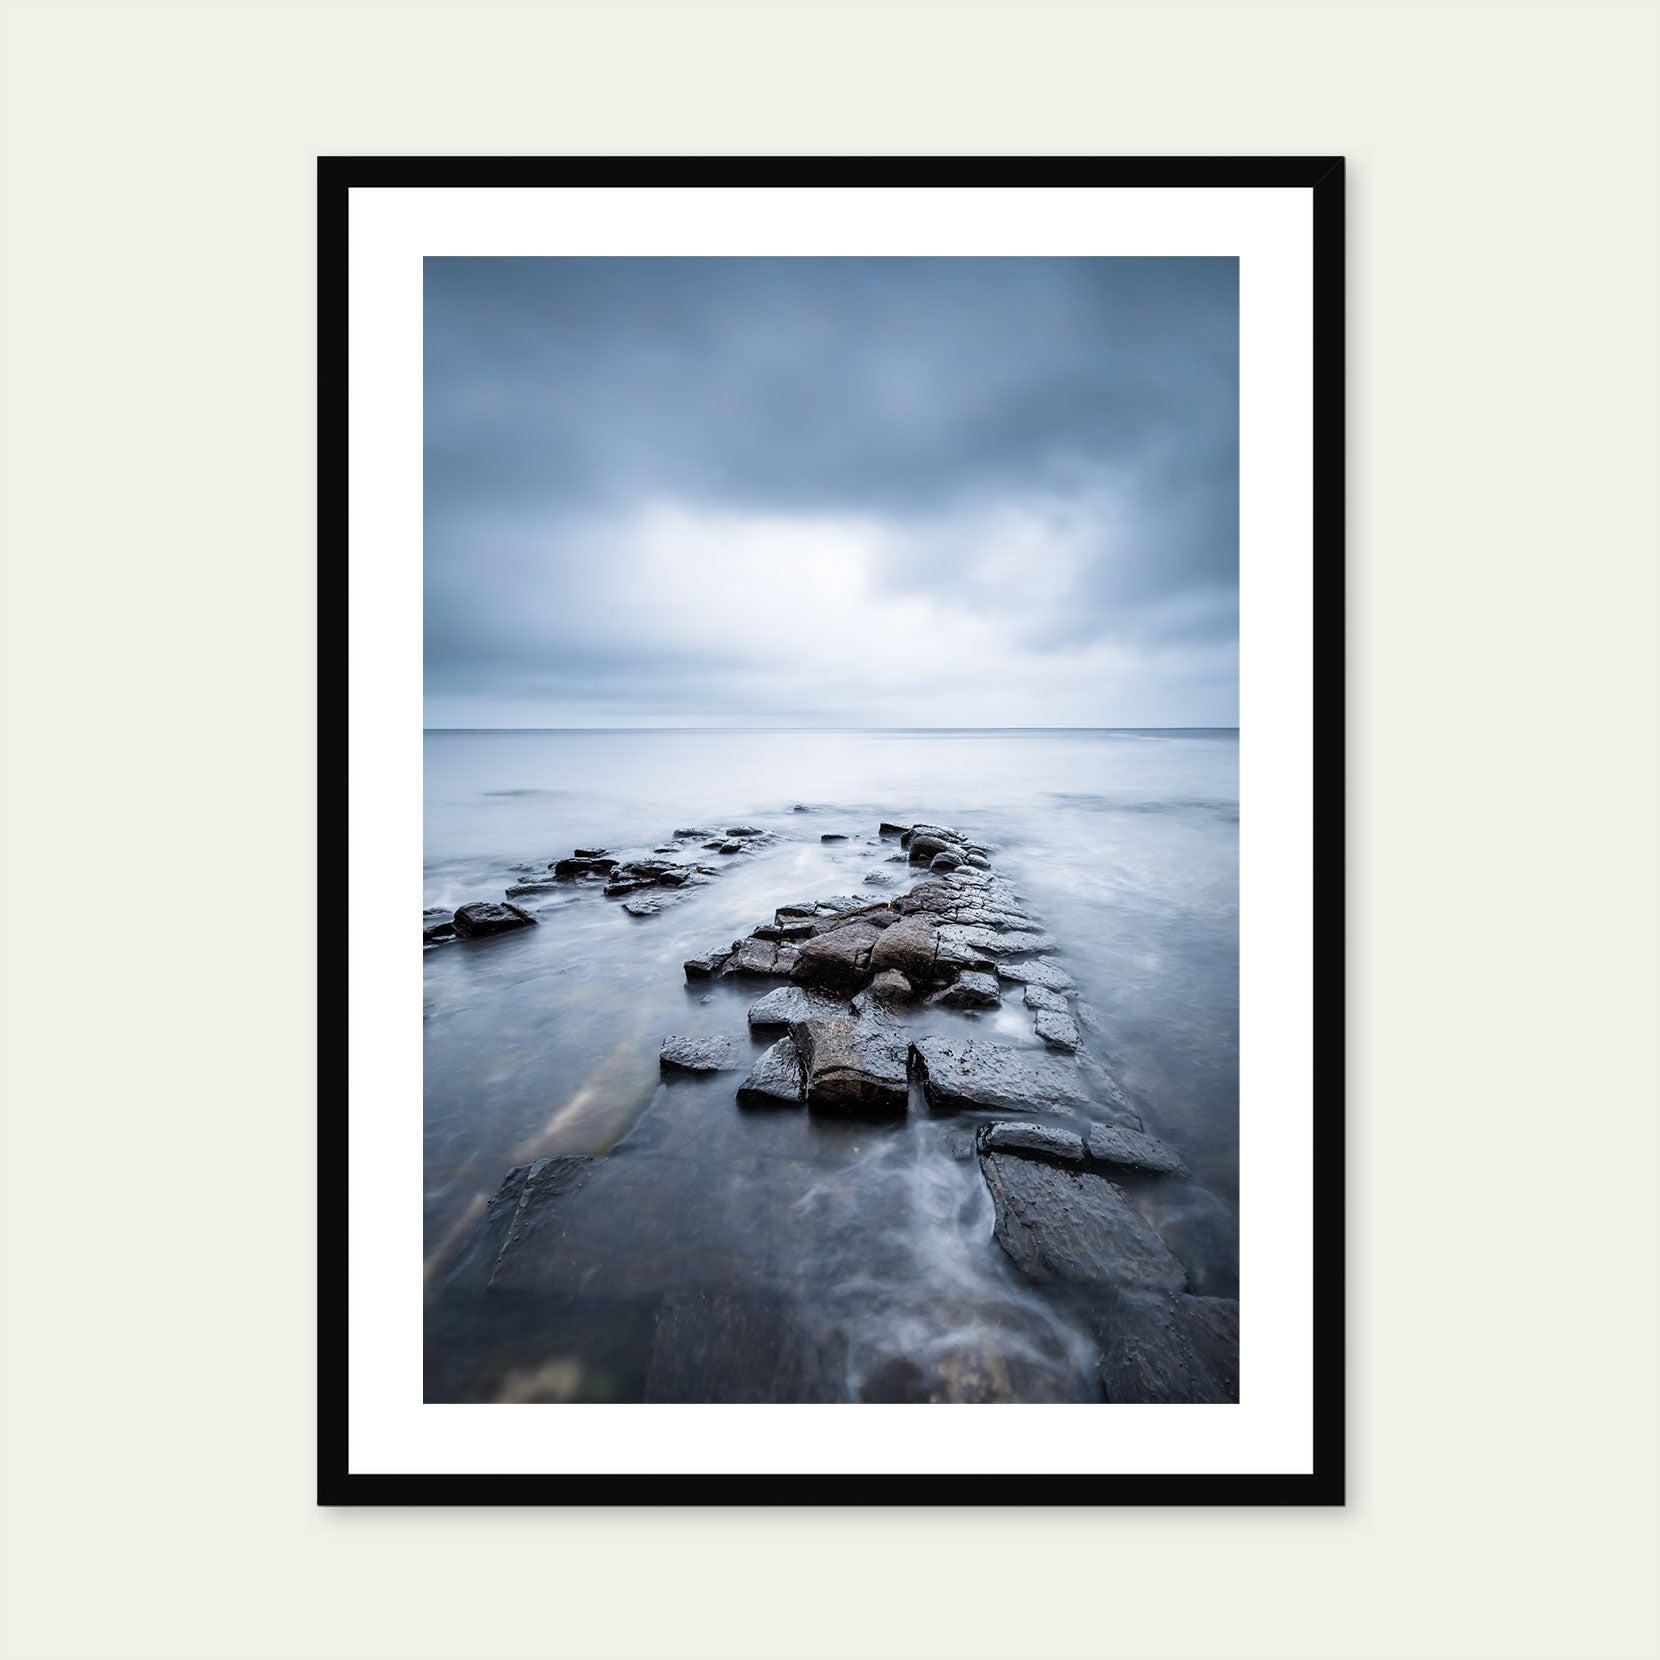 A black framed print of a moody seascape in Norway